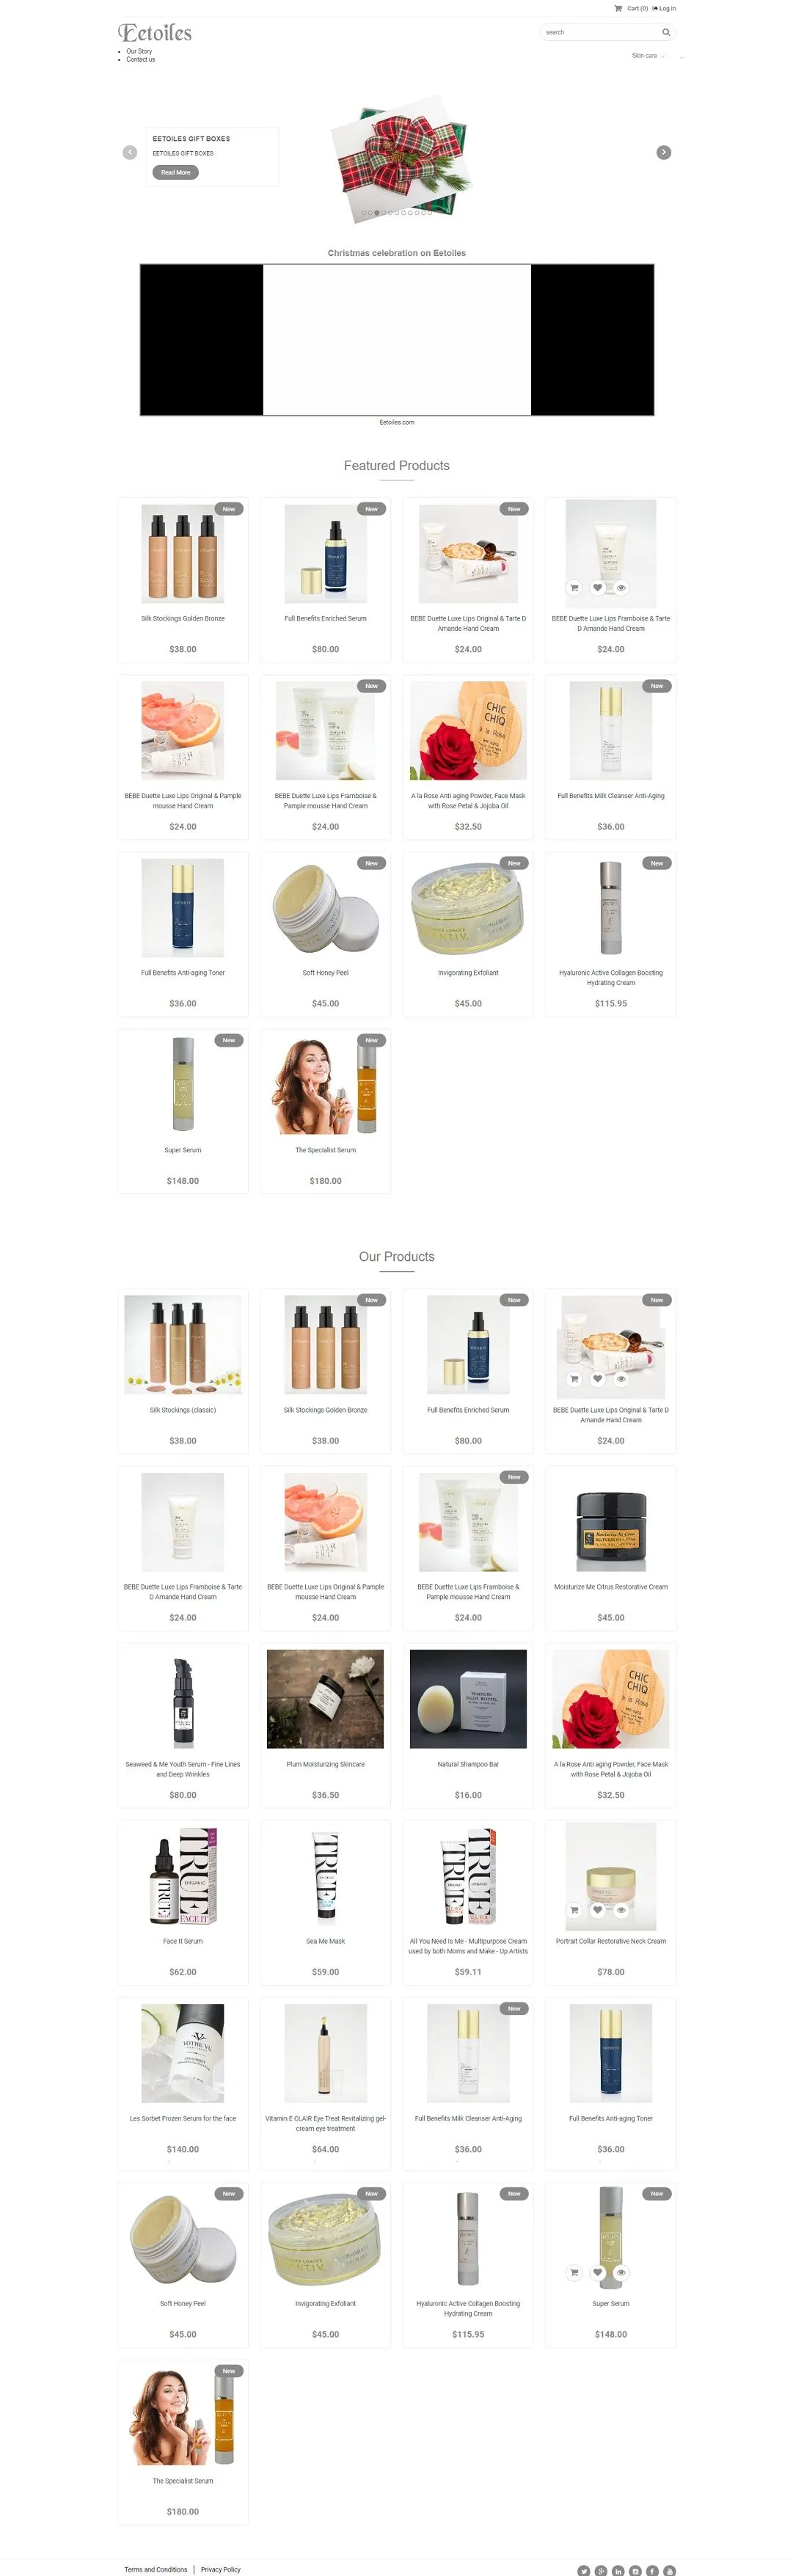 Skin-Care-and-cosmetic-ecommerce-retail-website-design-